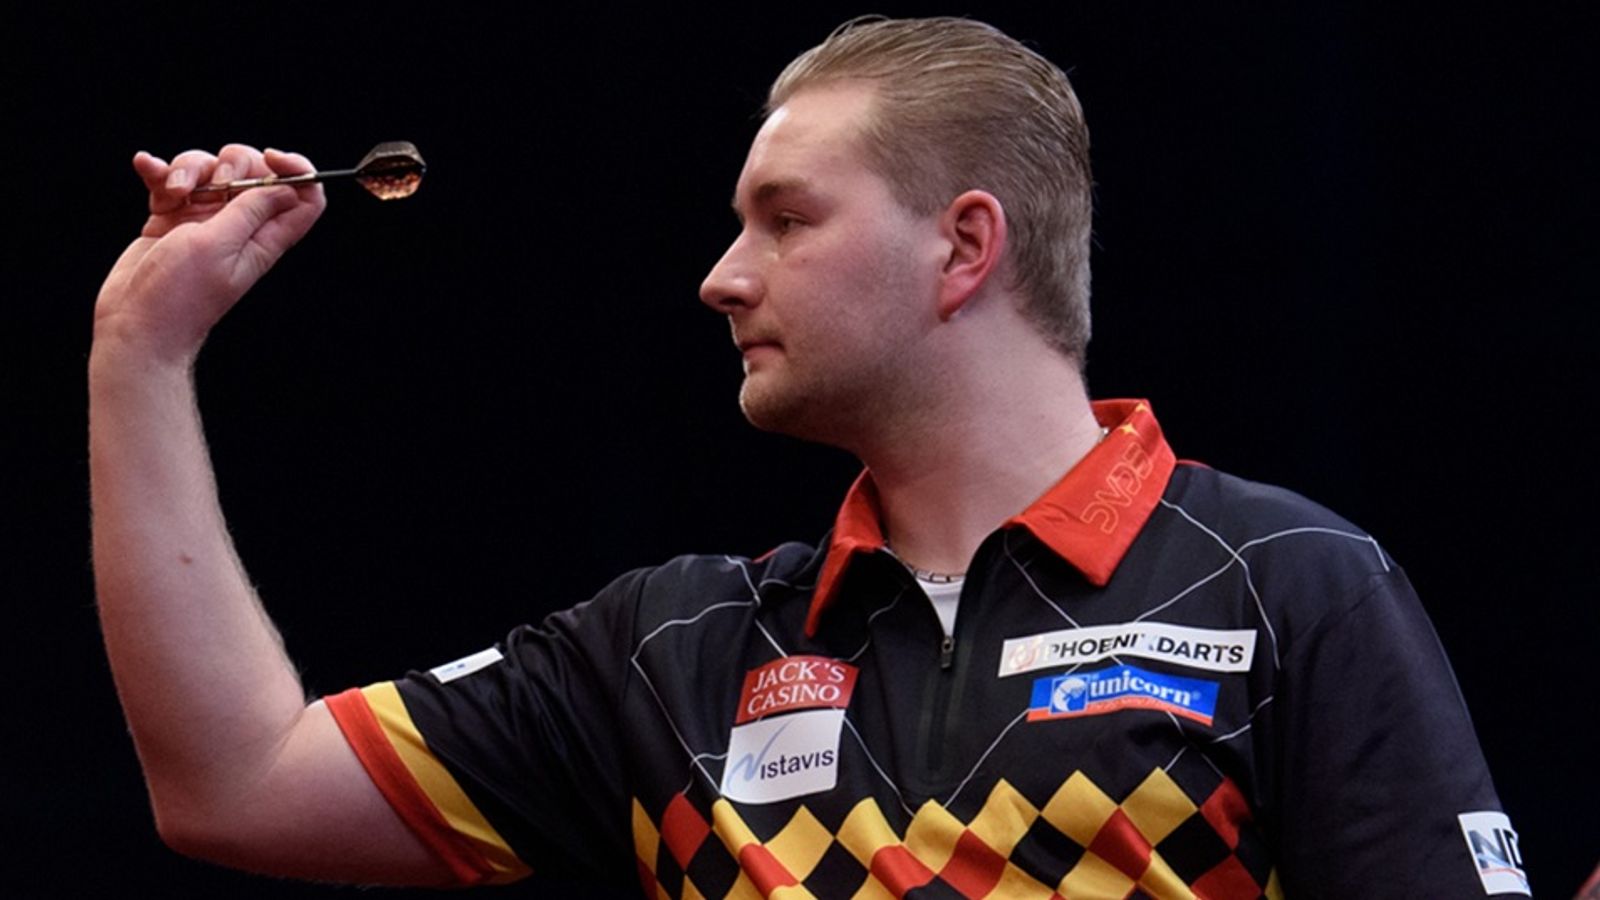 Dimitri Van den Bergh ruled out of Grand Slam of Darts after positive Covid-19 test